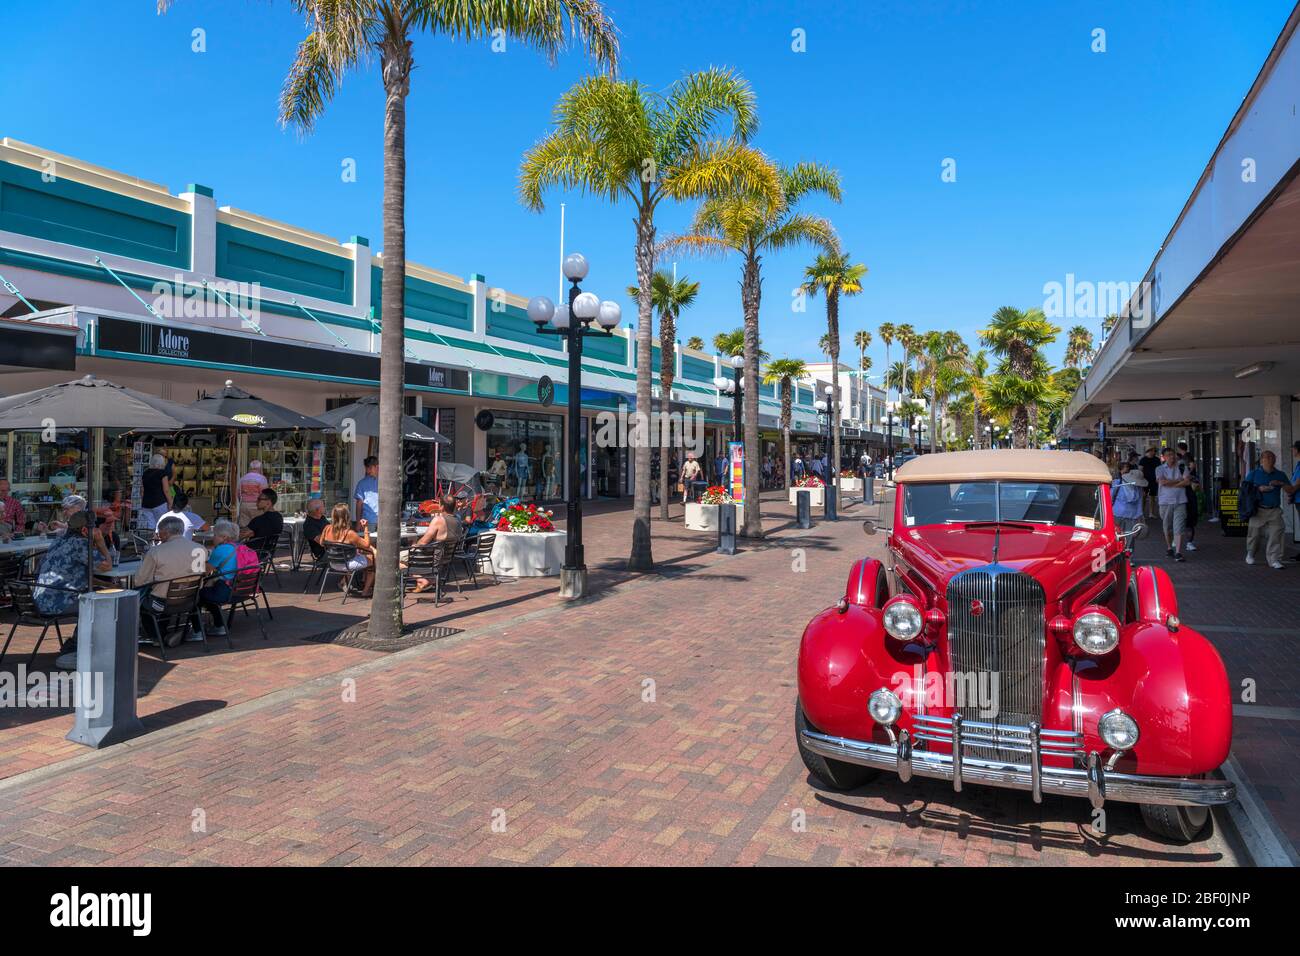 Cafes and shops on Emerson Street in the art deco district of downtown Napier, New Zealand Stock Photo